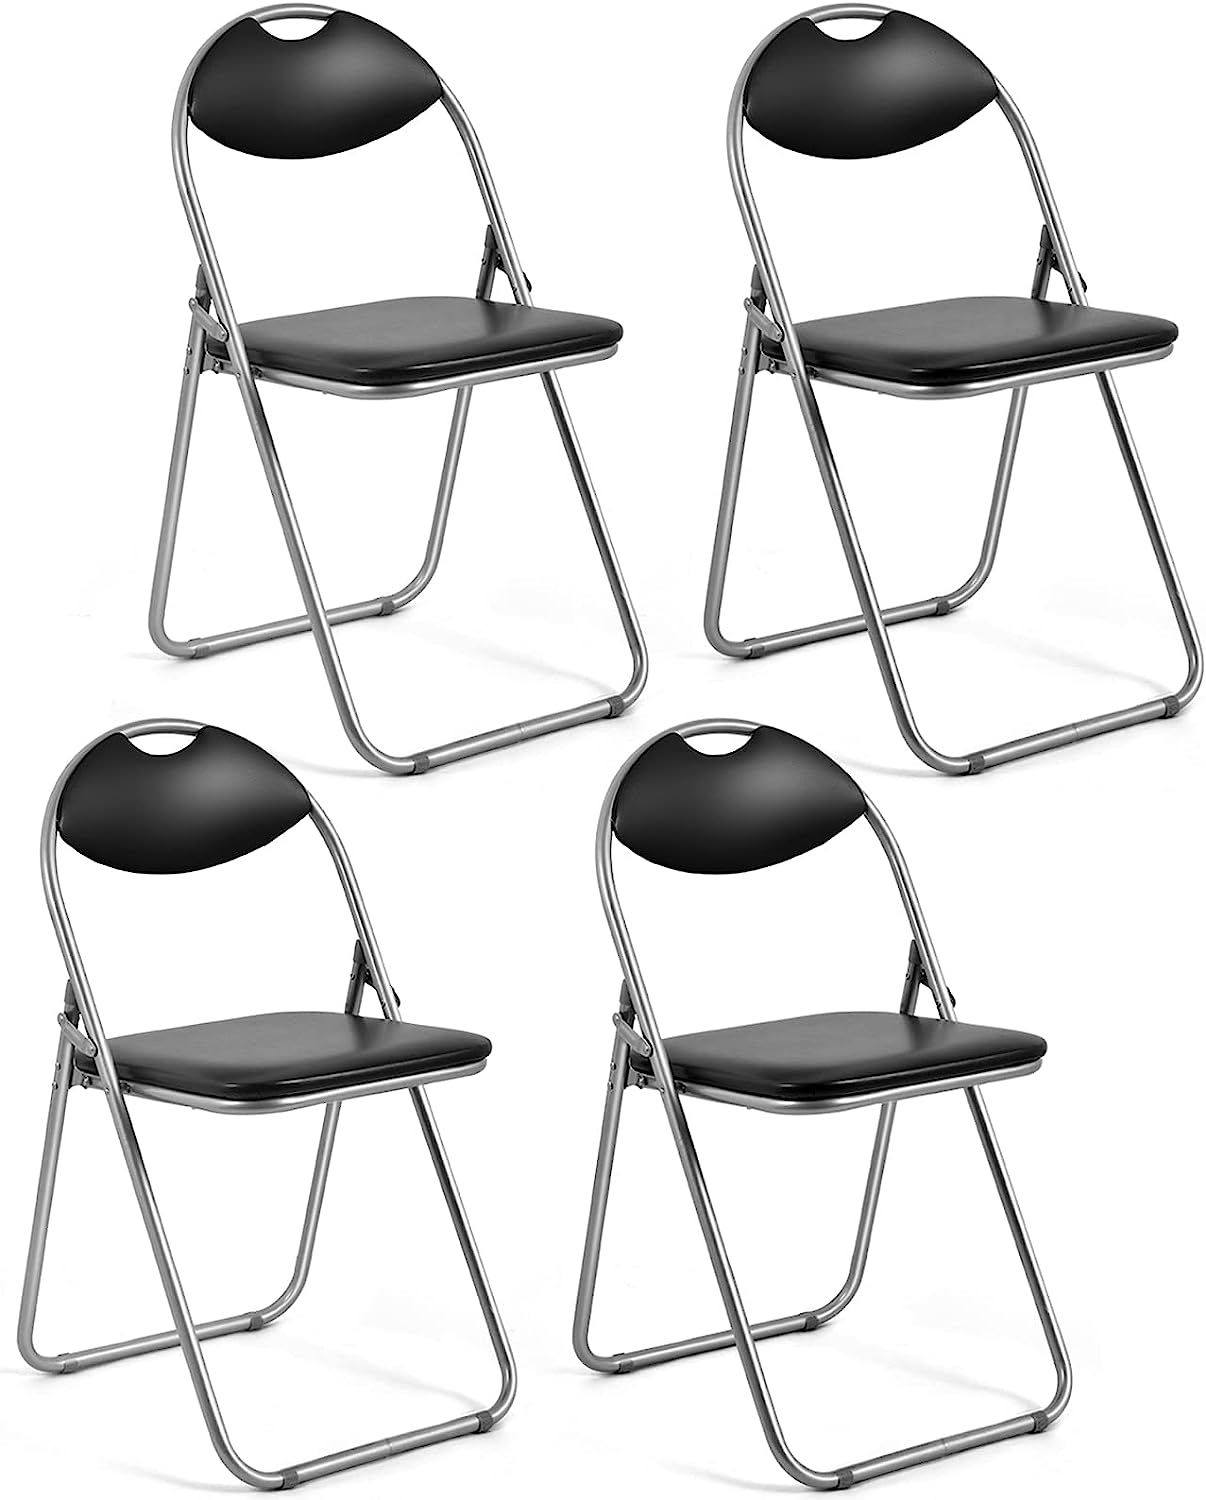 6 PCS Folding Chairs Set with Padded Seats and Carrying Handle